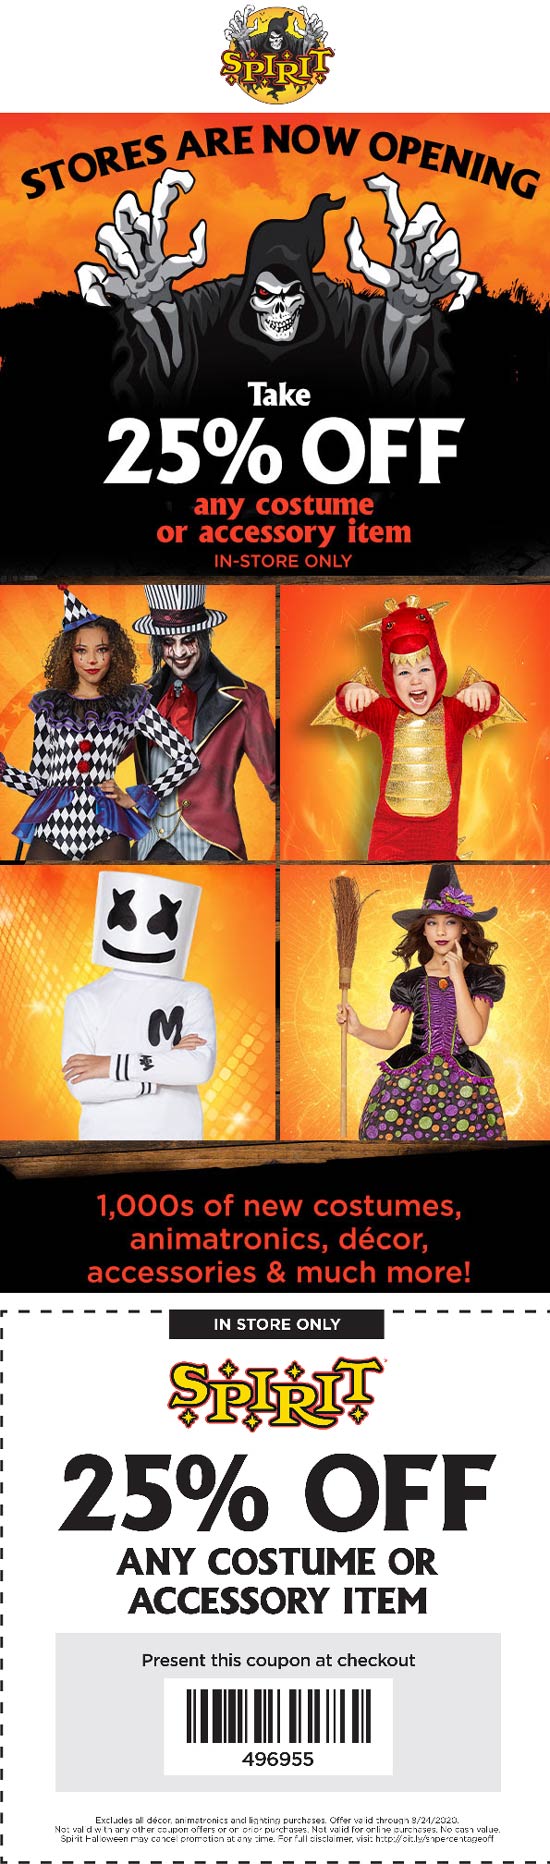 Spirit Halloween stores Coupon  25% off any costume or accessory at Spirit Halloween #spirithalloween 